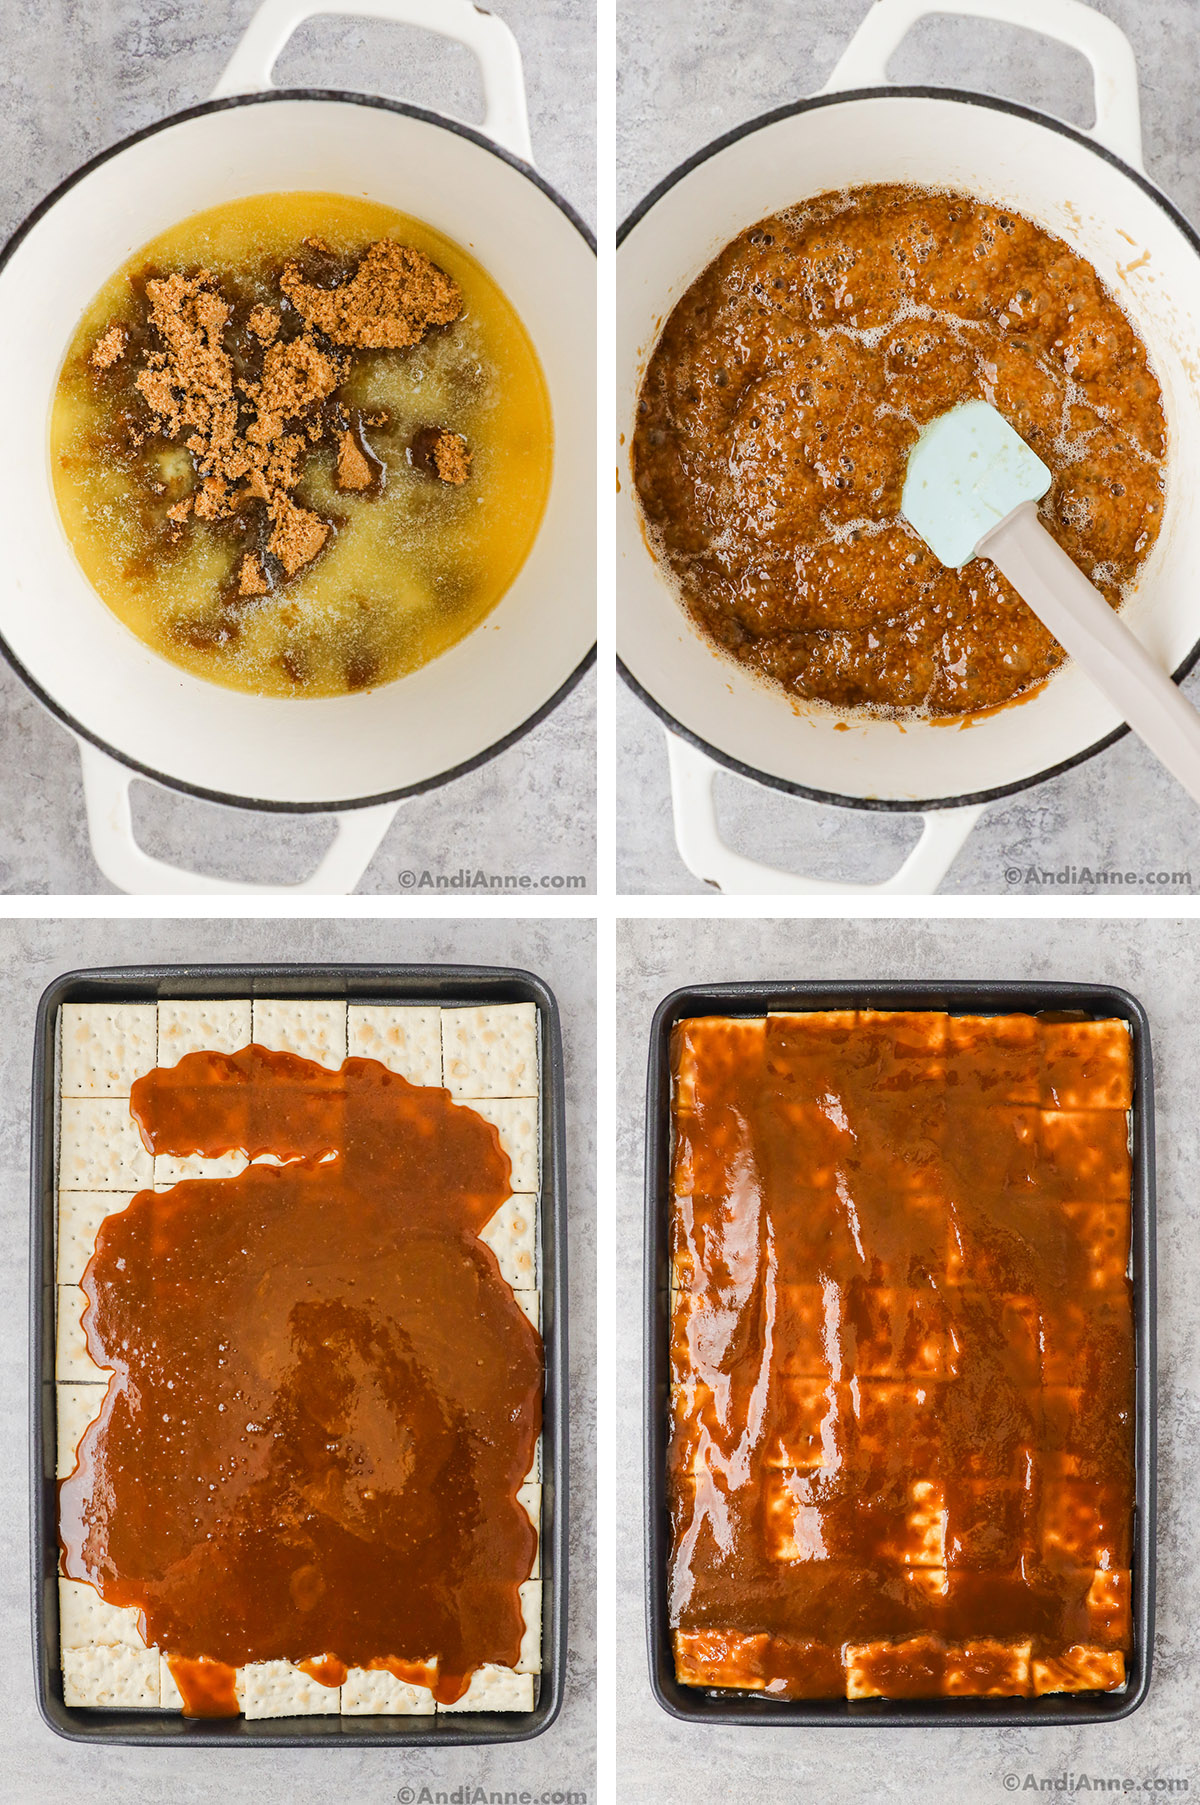 Four images, first two are of a pot. First with melted butter and brown sugar. Second with bubbling toffee and spatula. Third image is toffee poured over top, fourth is toffee spread overtop of baking sheet with saltine crackers.